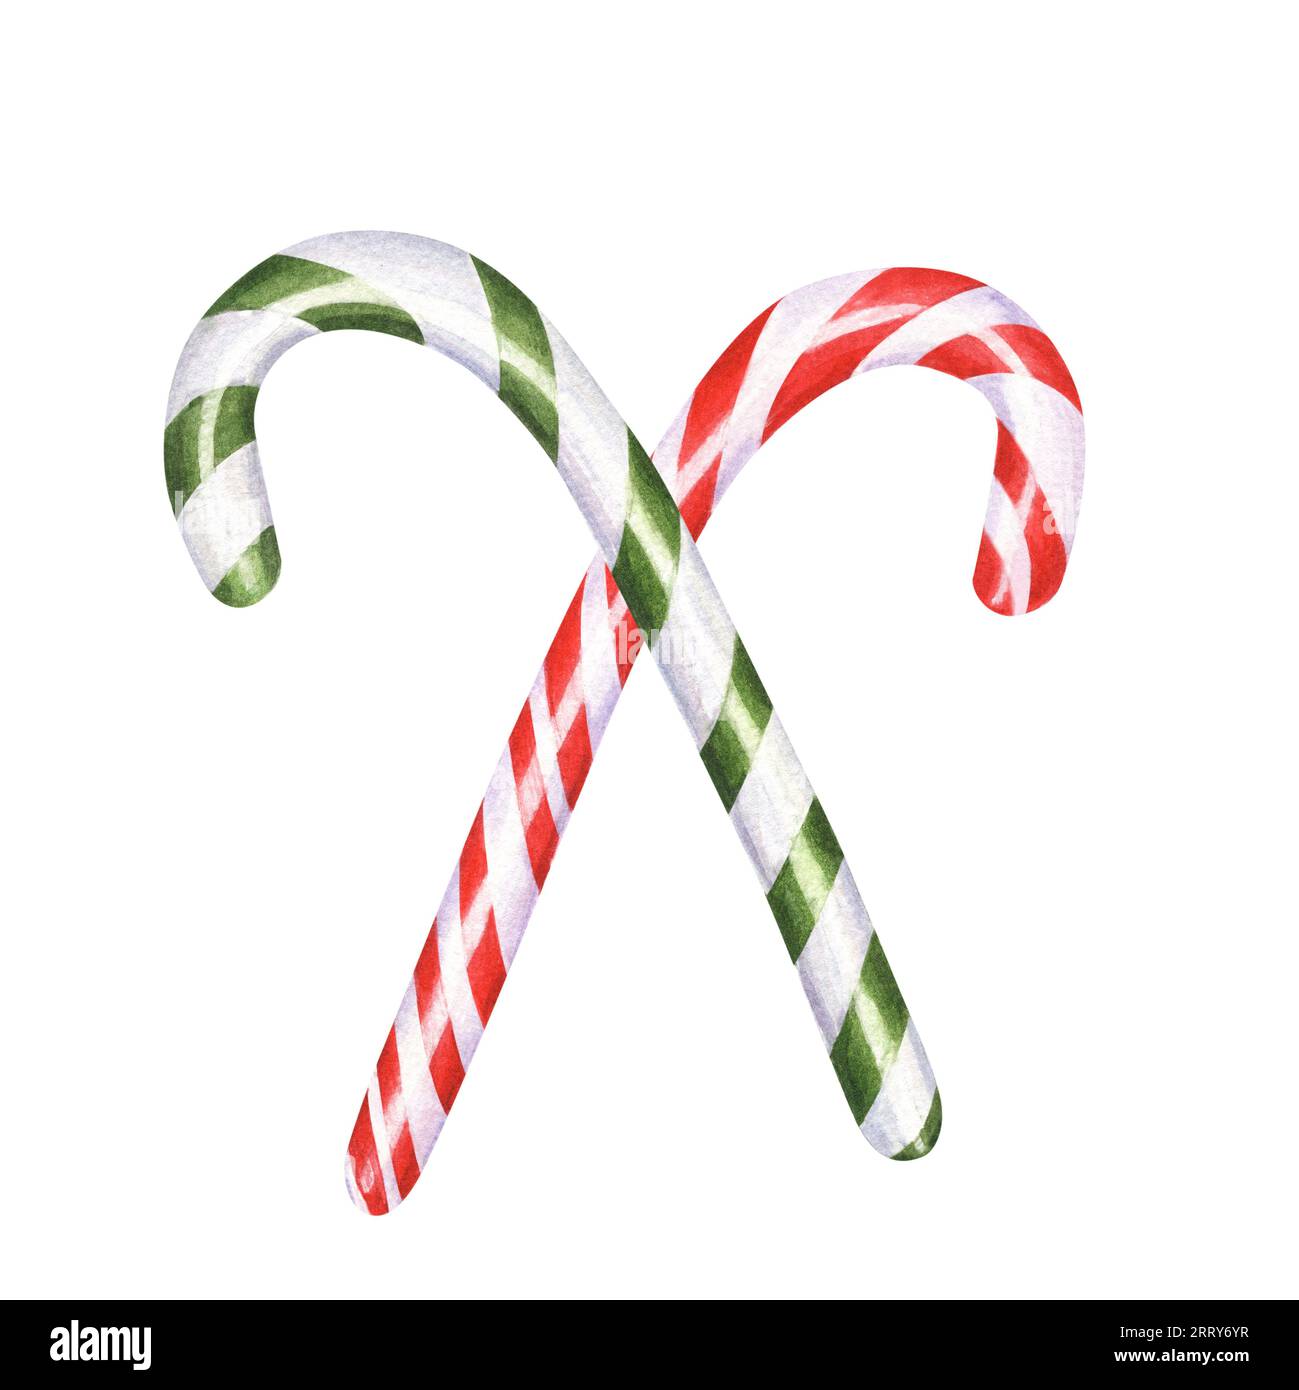 Christmas Floating Candy Canes, Peppermints, Lollipops, Red, Green